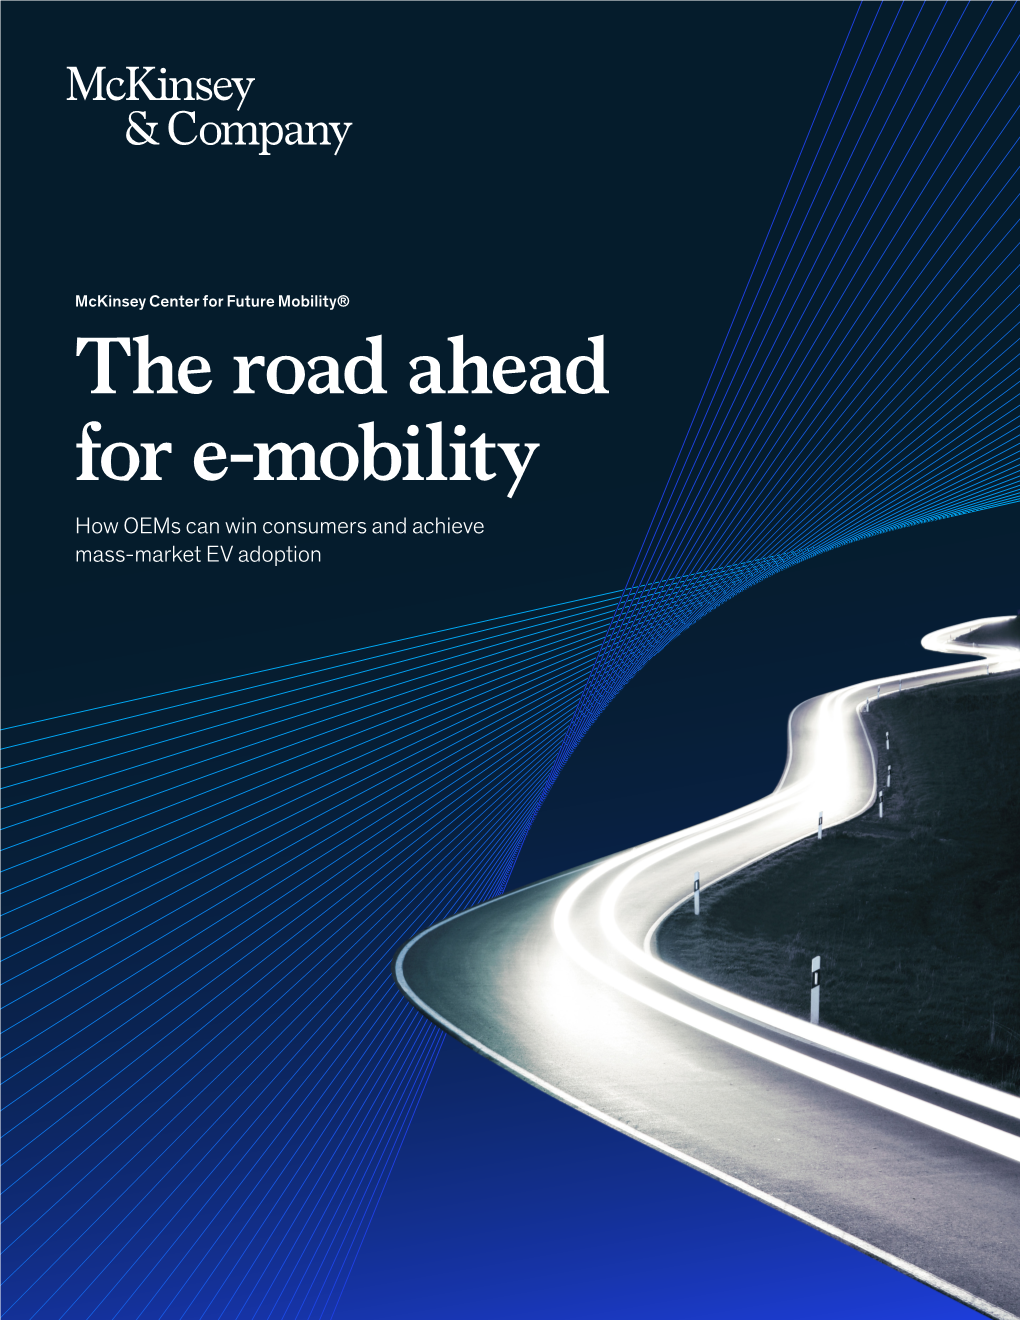 The Road Ahead for E-Mobility